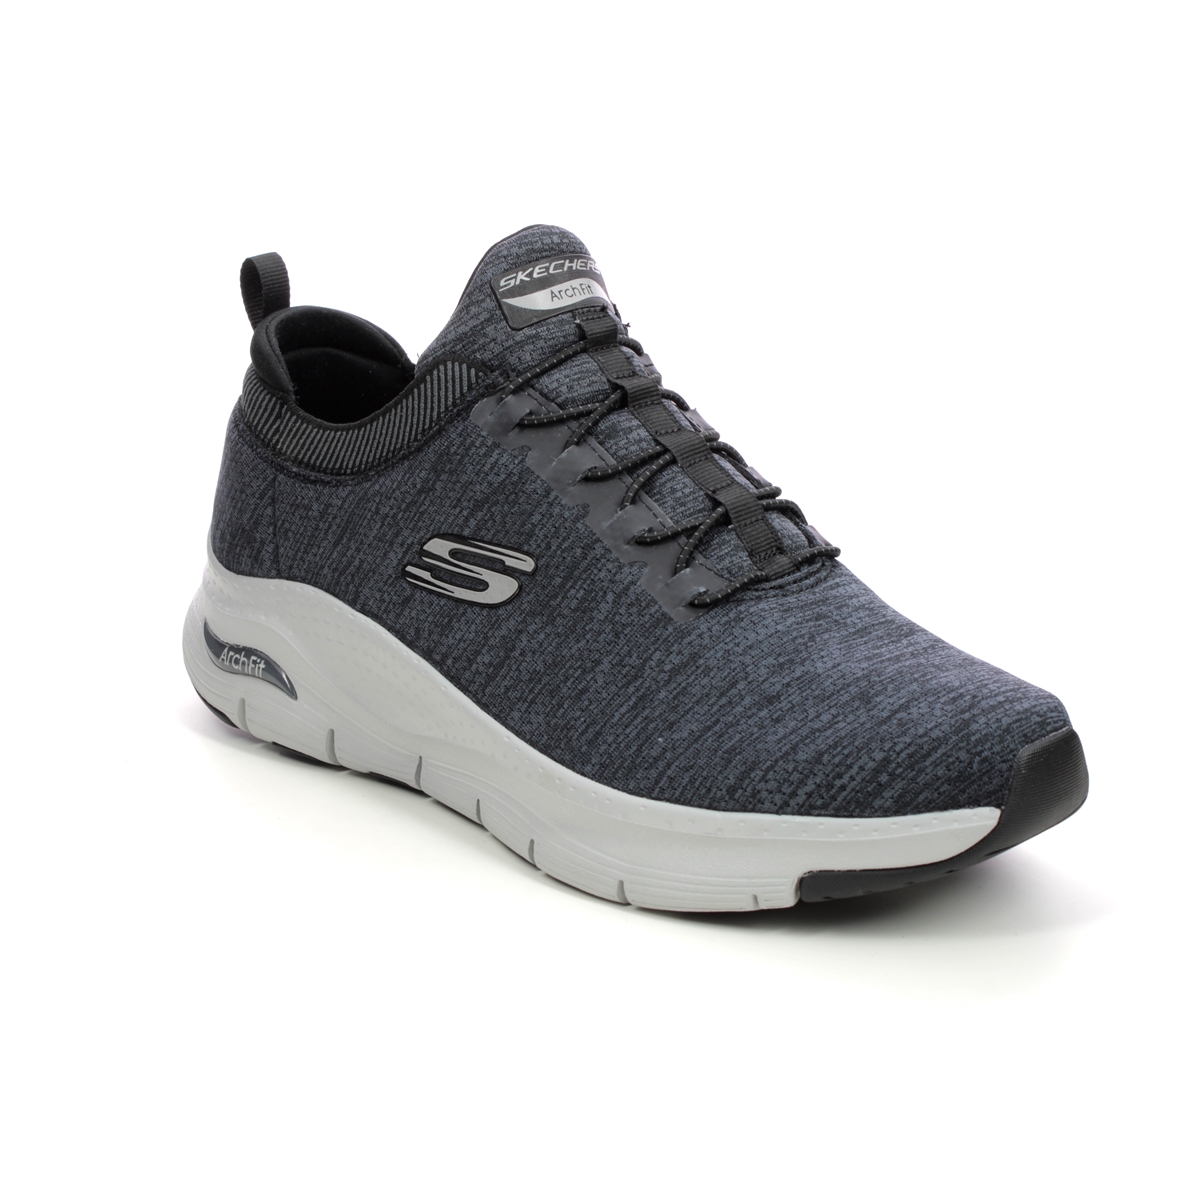 Skechers Arch Fit Mens Bungee BKGY Black grey Mens trainers 232301 in a Plain  in Size 9